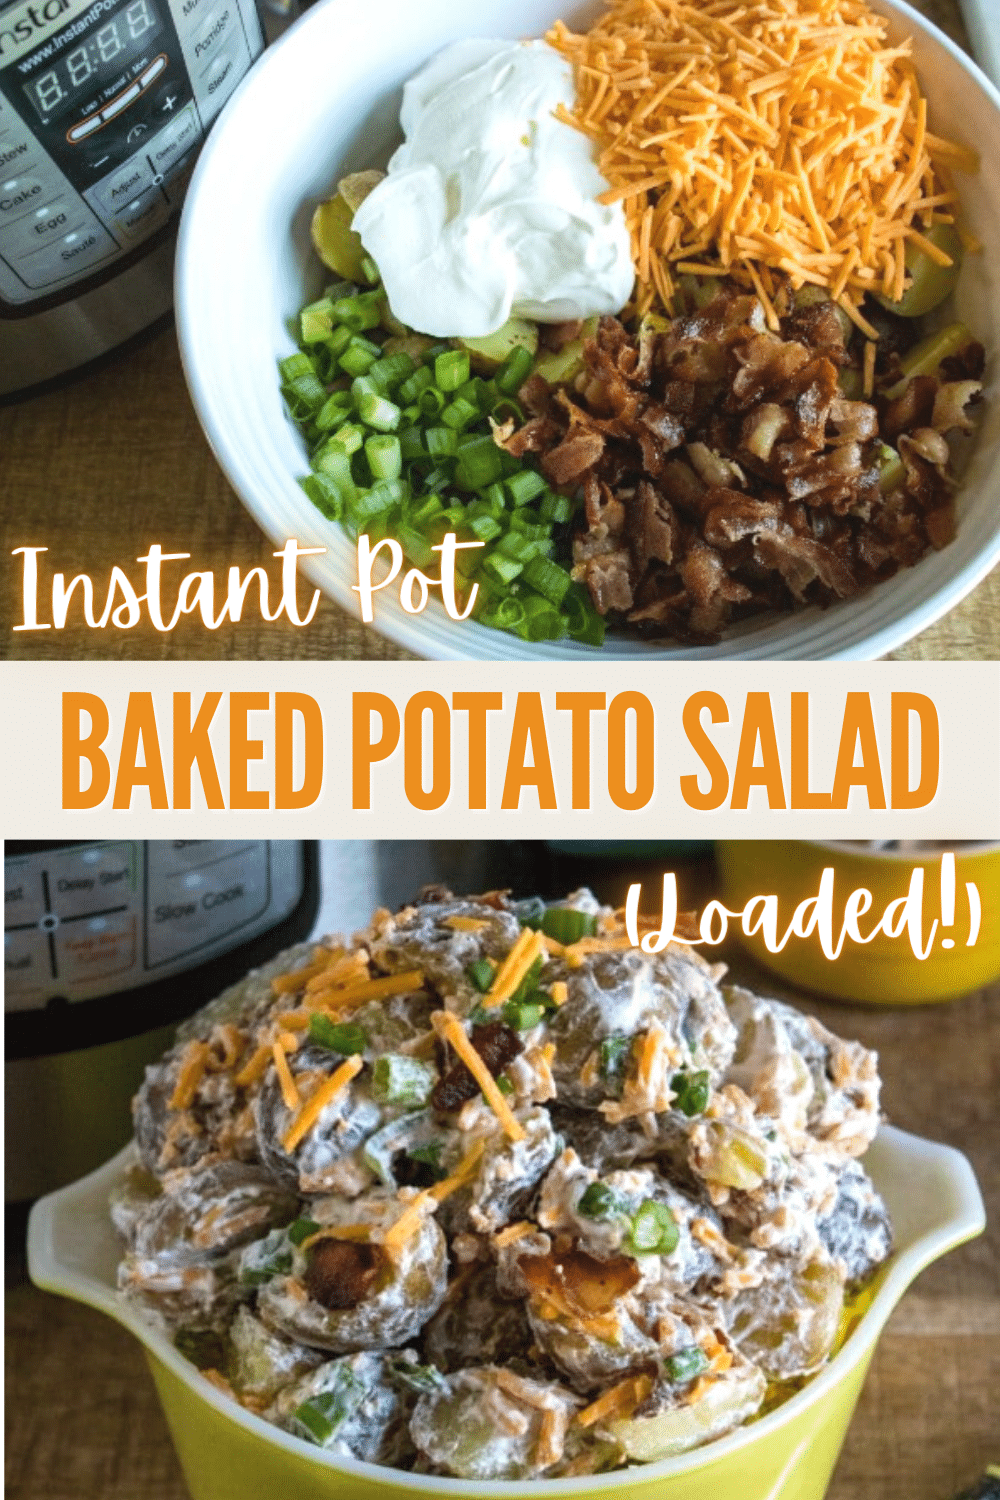 This Instant Pot Loaded Baked Potato Salad is always a hit at BBQs and picnics. Even better, it's as easy to make as it is delicious! #potatosalad #instantpot #sidedish via @wondermomwannab